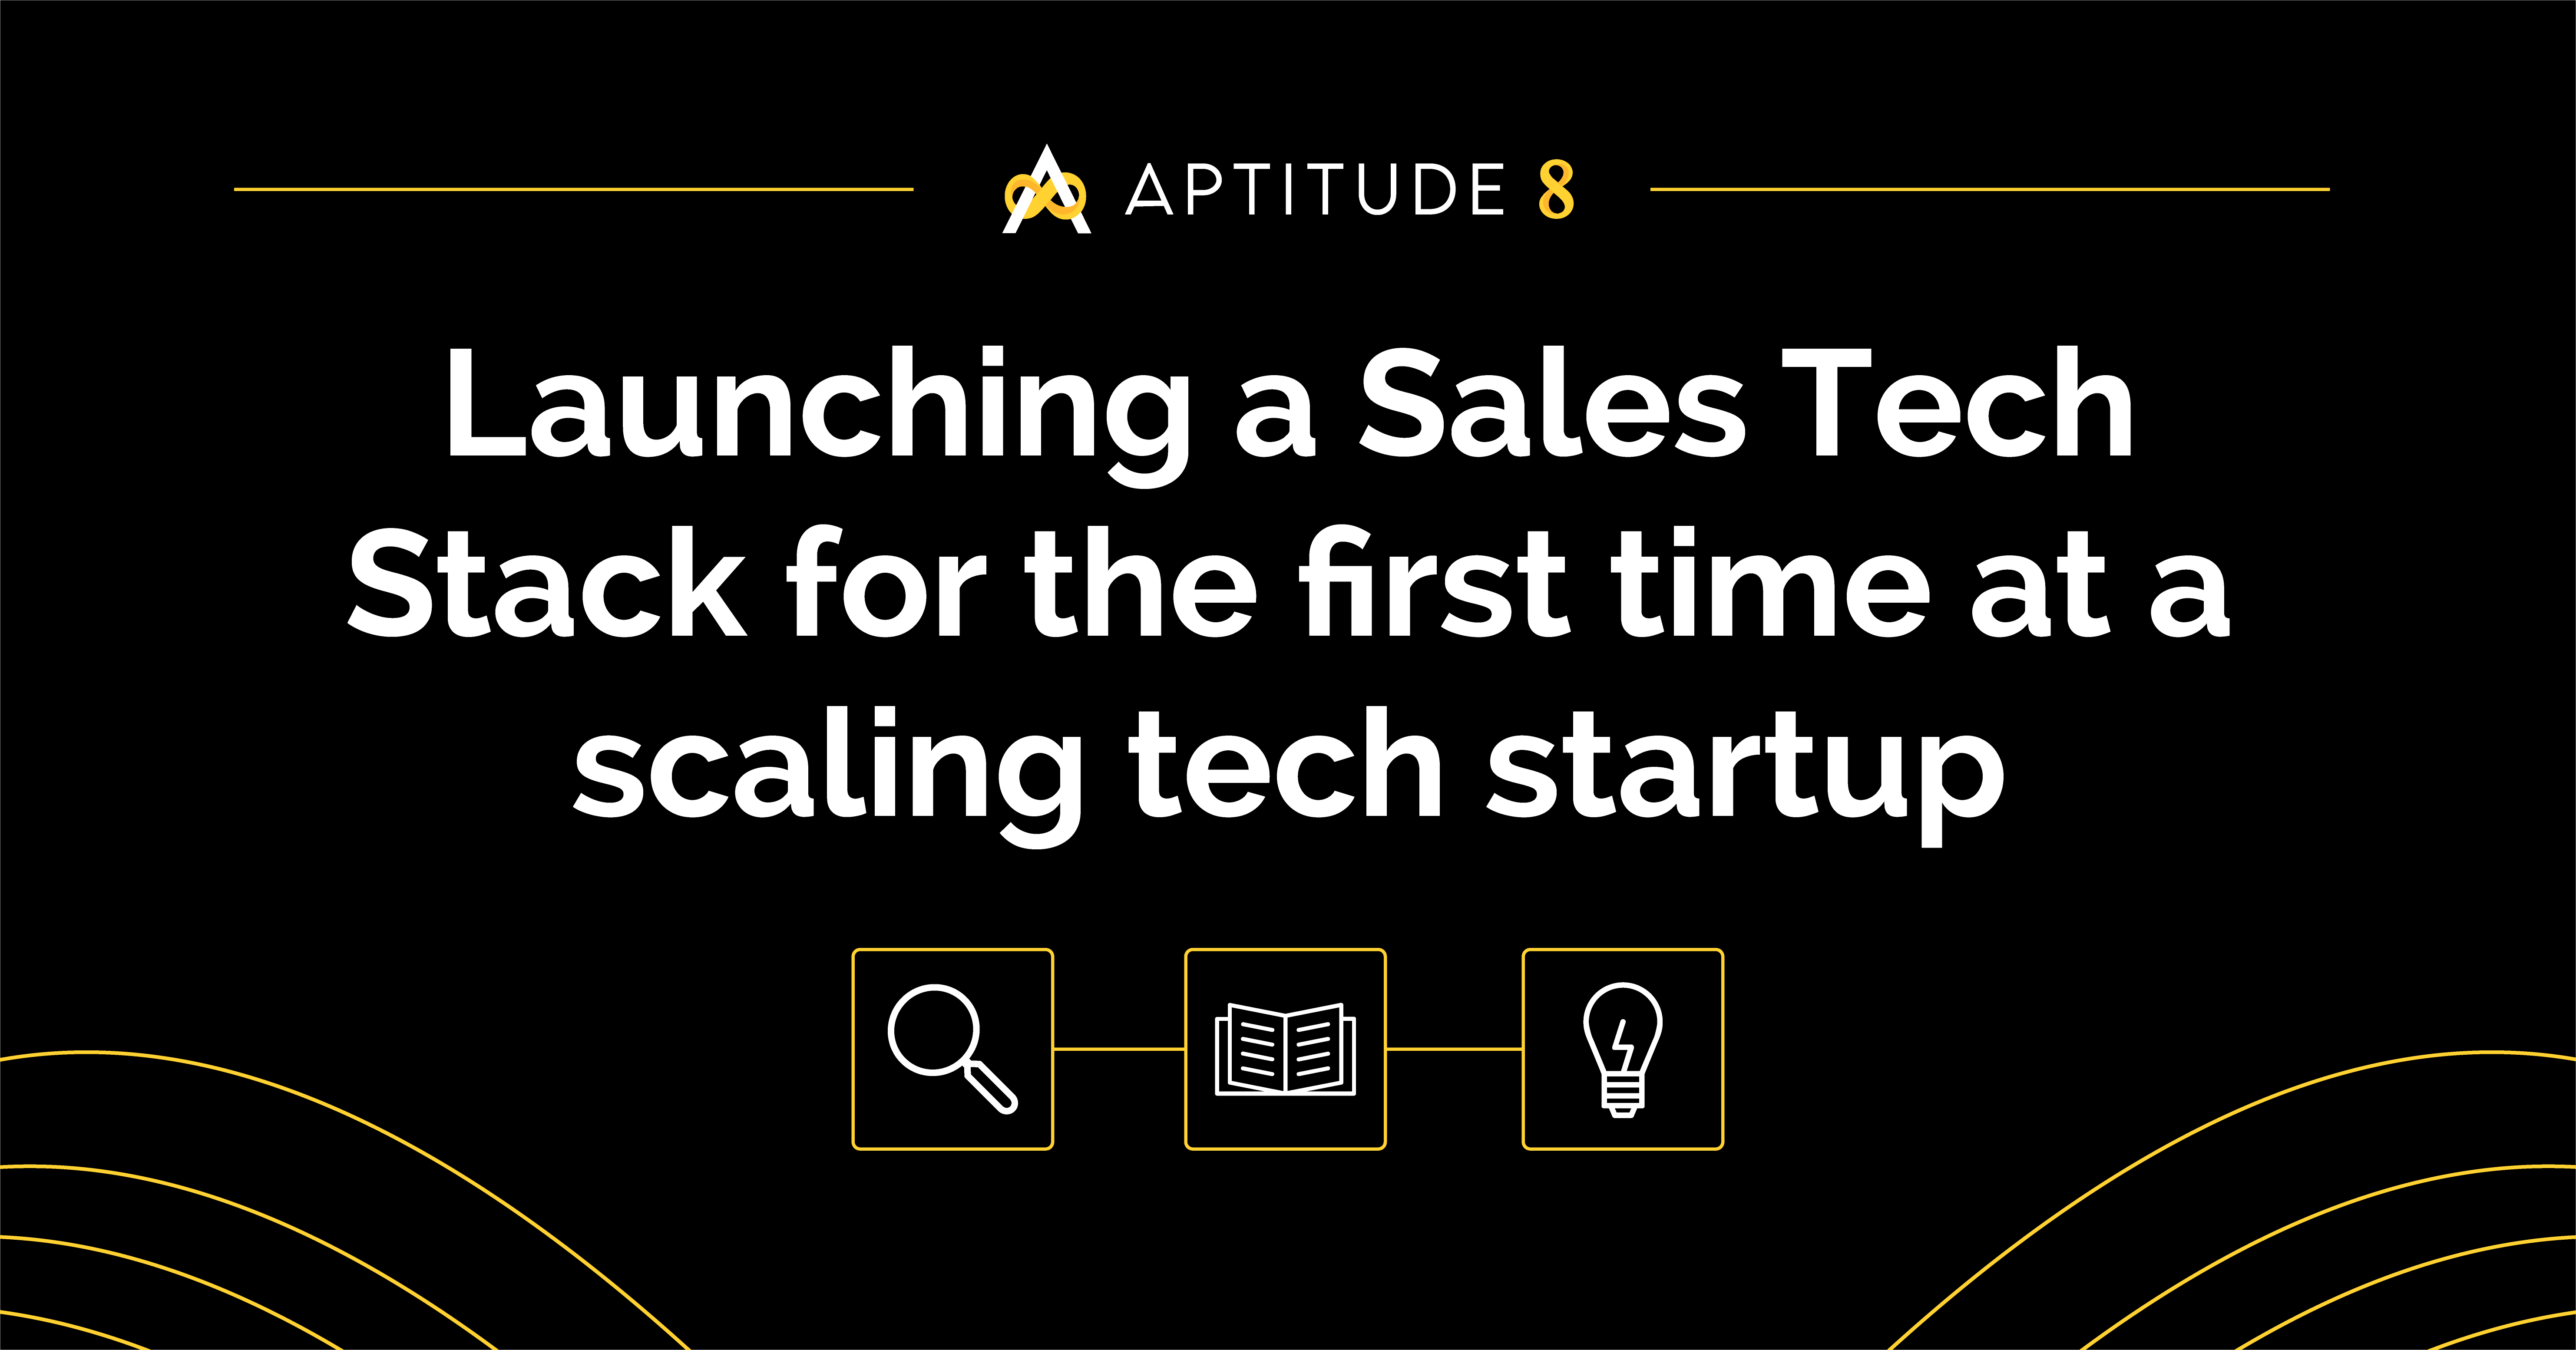 Launching a Sales Tech Stack for the first time at a scaling tech startup